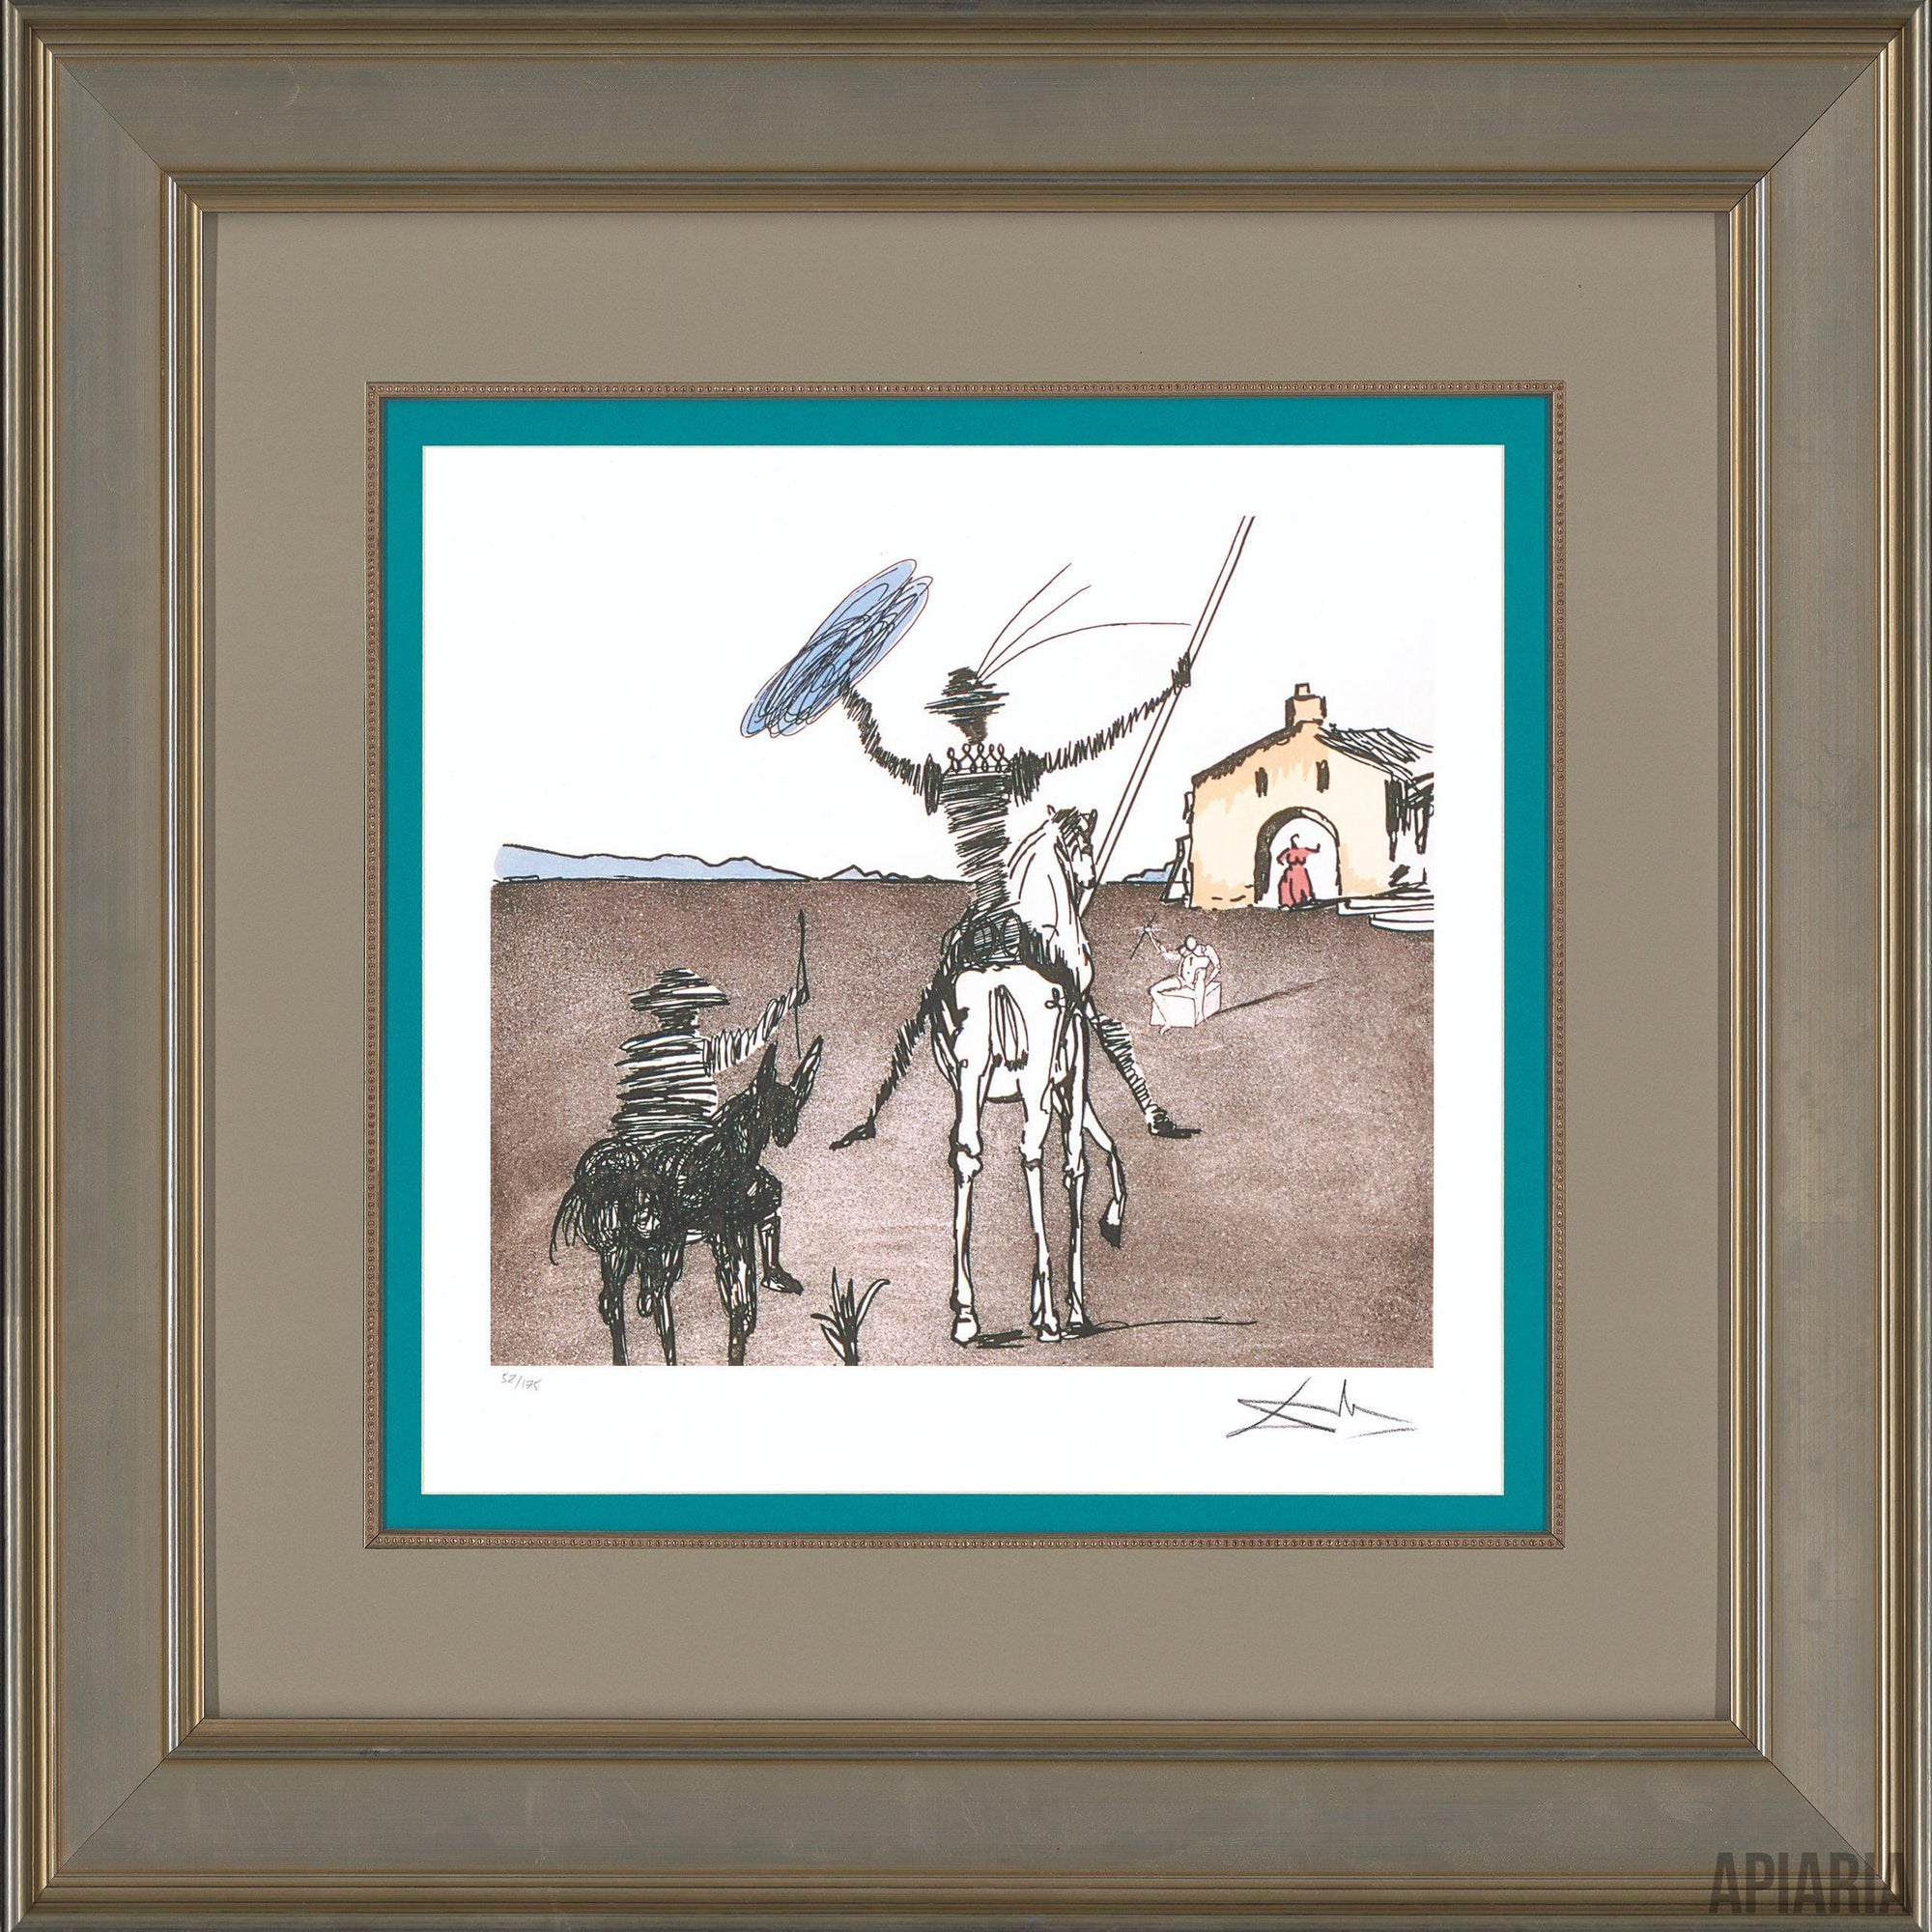 Salvador Dalí "The Impossible Dream"-Framed Art-Apiaria